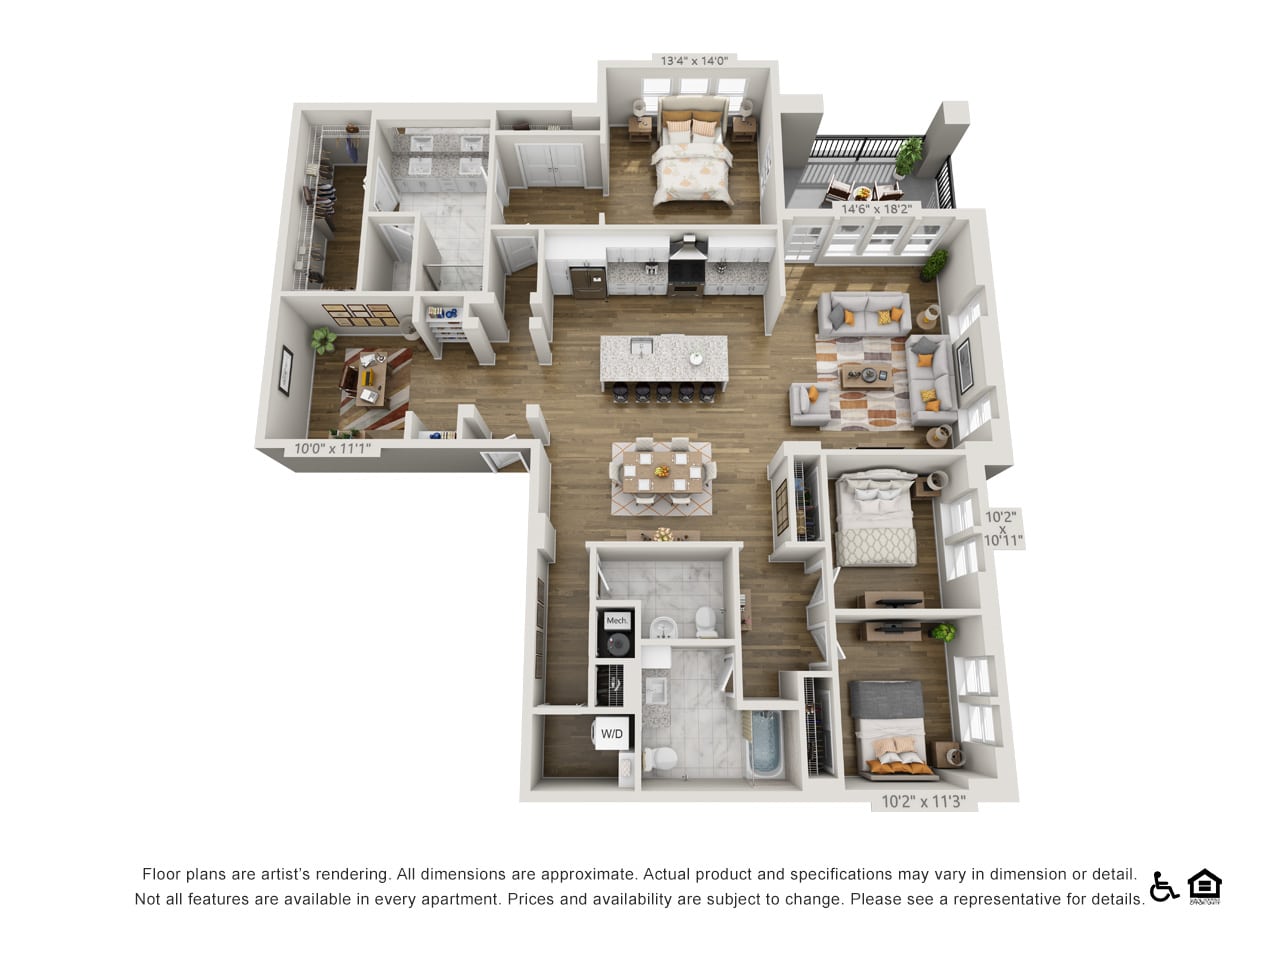 Floor Plans Rendering Of A House With Three Bedrooms, Kitchen, And Two Wash Rooms.